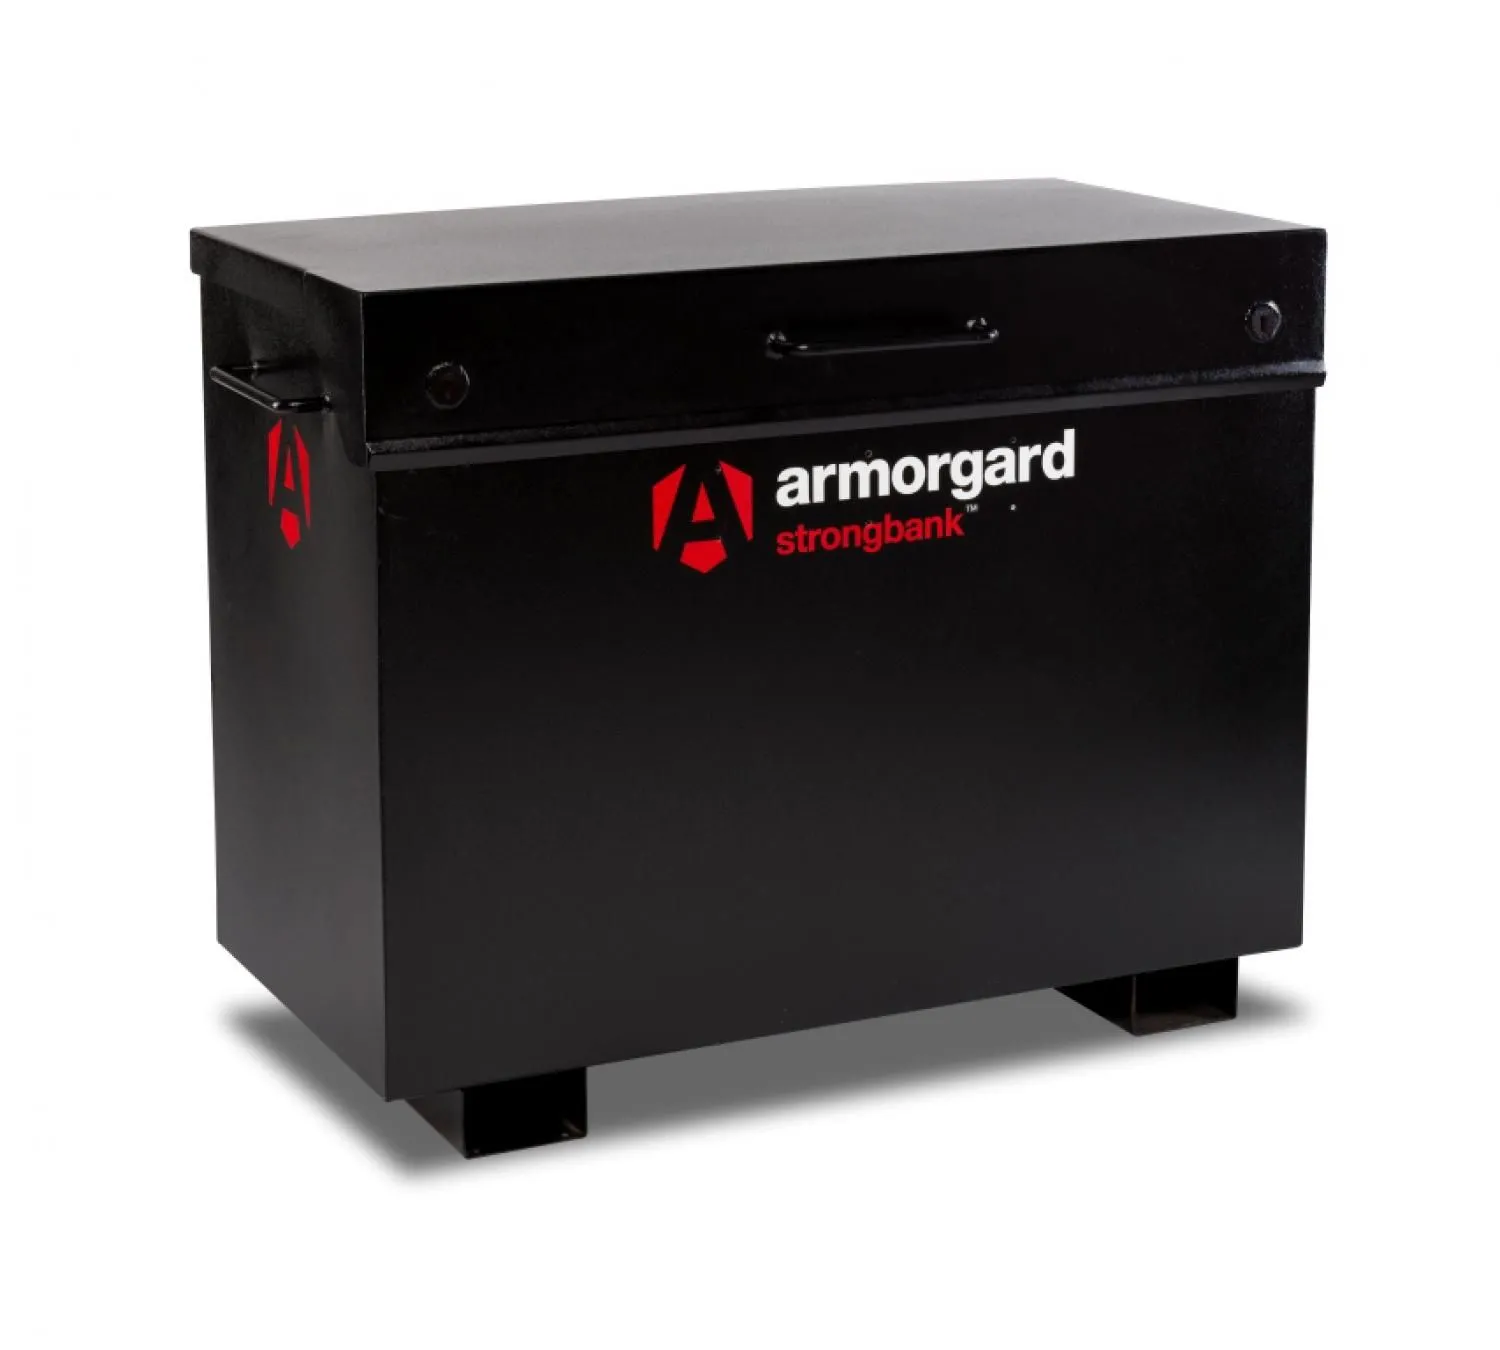 Armorgard Strongbank Secure Site Storage Box - 1300mm, 690mm, 970mm